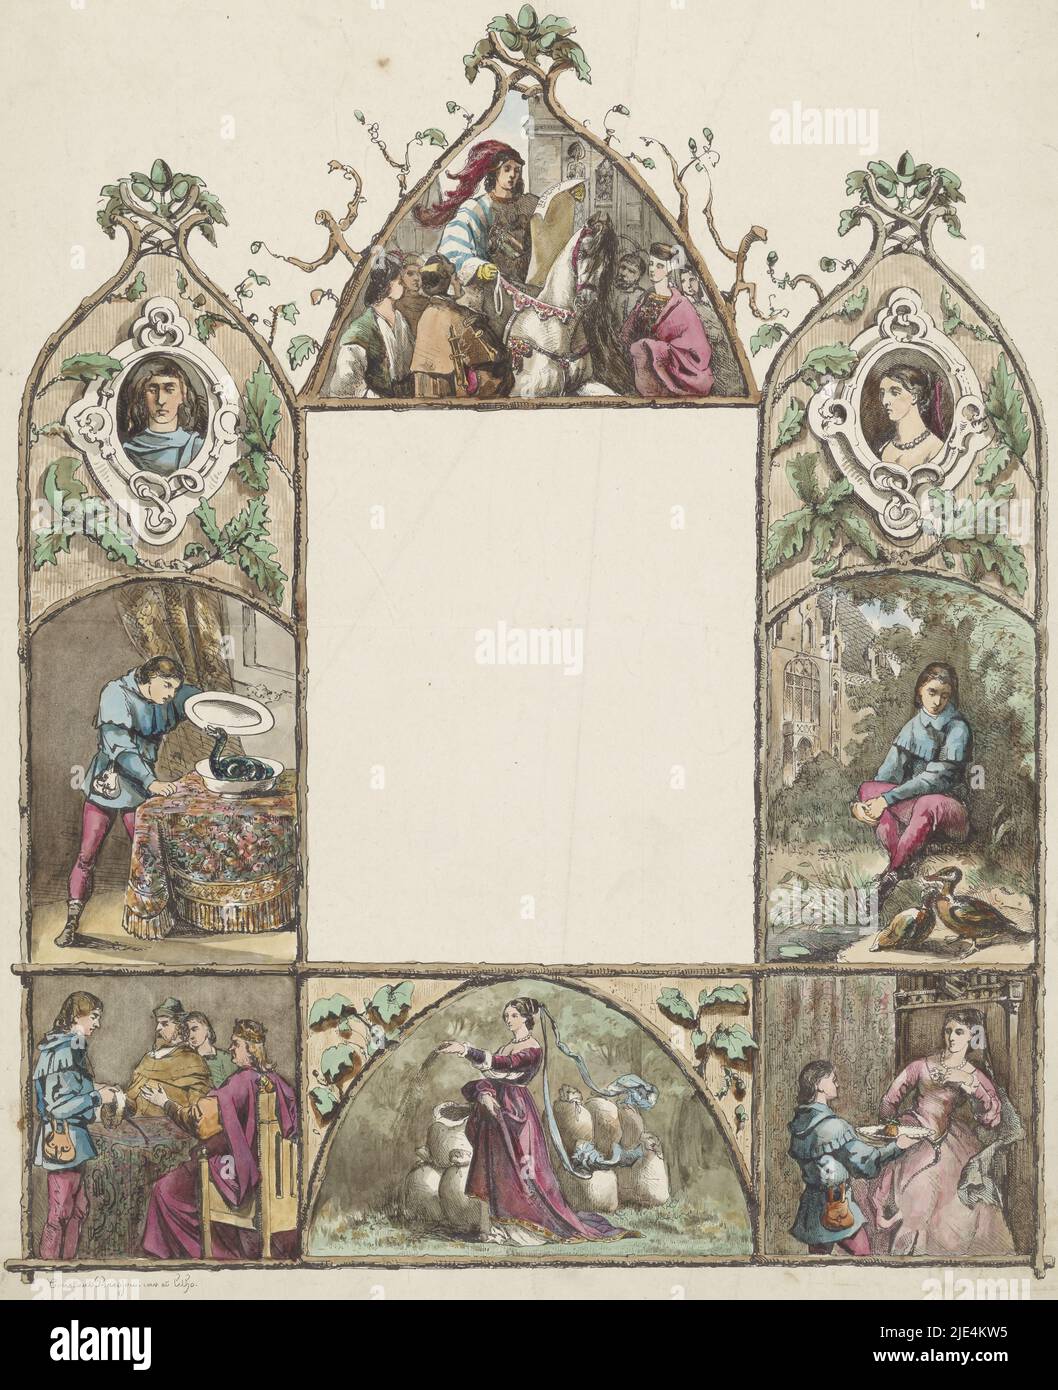 Greeting letter with figures from the fairy tale The White Snake, Constantius Wilhelmus Johannes Baesjou, 1851 - 1914, Windows depict episodes from the Grimm Brothers' fairy tale The White Snake. Top left and right are the servant and the princess. The servant discovers the white snake . He hears ducks talking about the missing ring. He asks the king for money and a horse. The princess scatters sacks of millet empty over a field. The servant offers the princess the apple from the tree of life., print maker: Constantius Wilhelmus Johannes Baesjou, (mentioned on object), The Hague, 1851 - 1914 Stock Photo